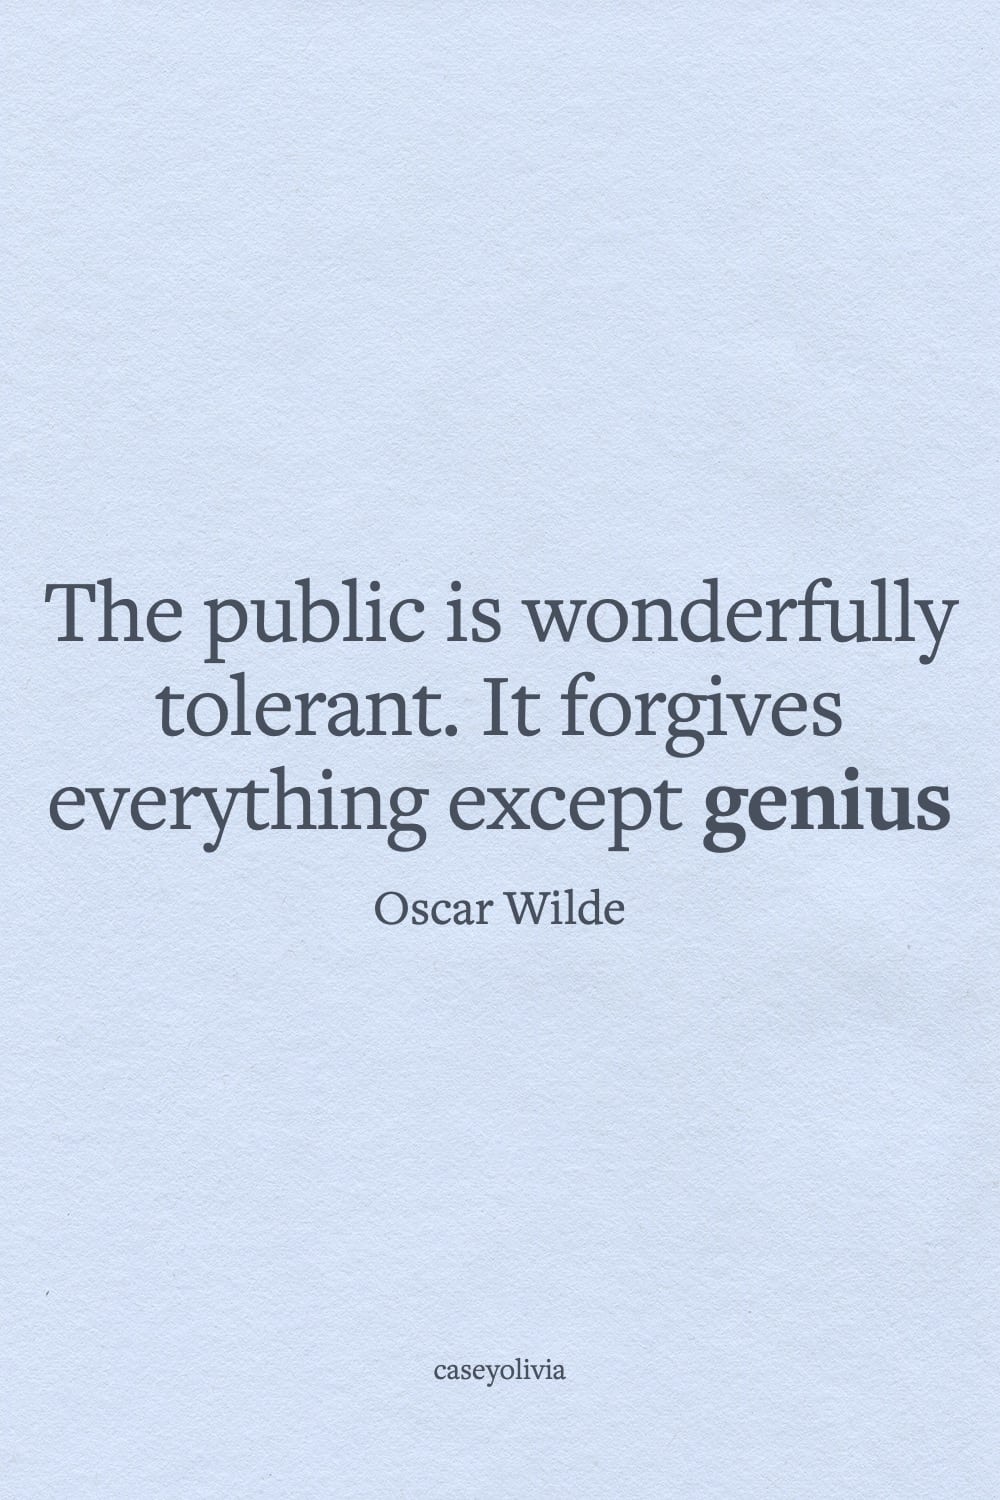 oscar wilde it forgives everything except genius